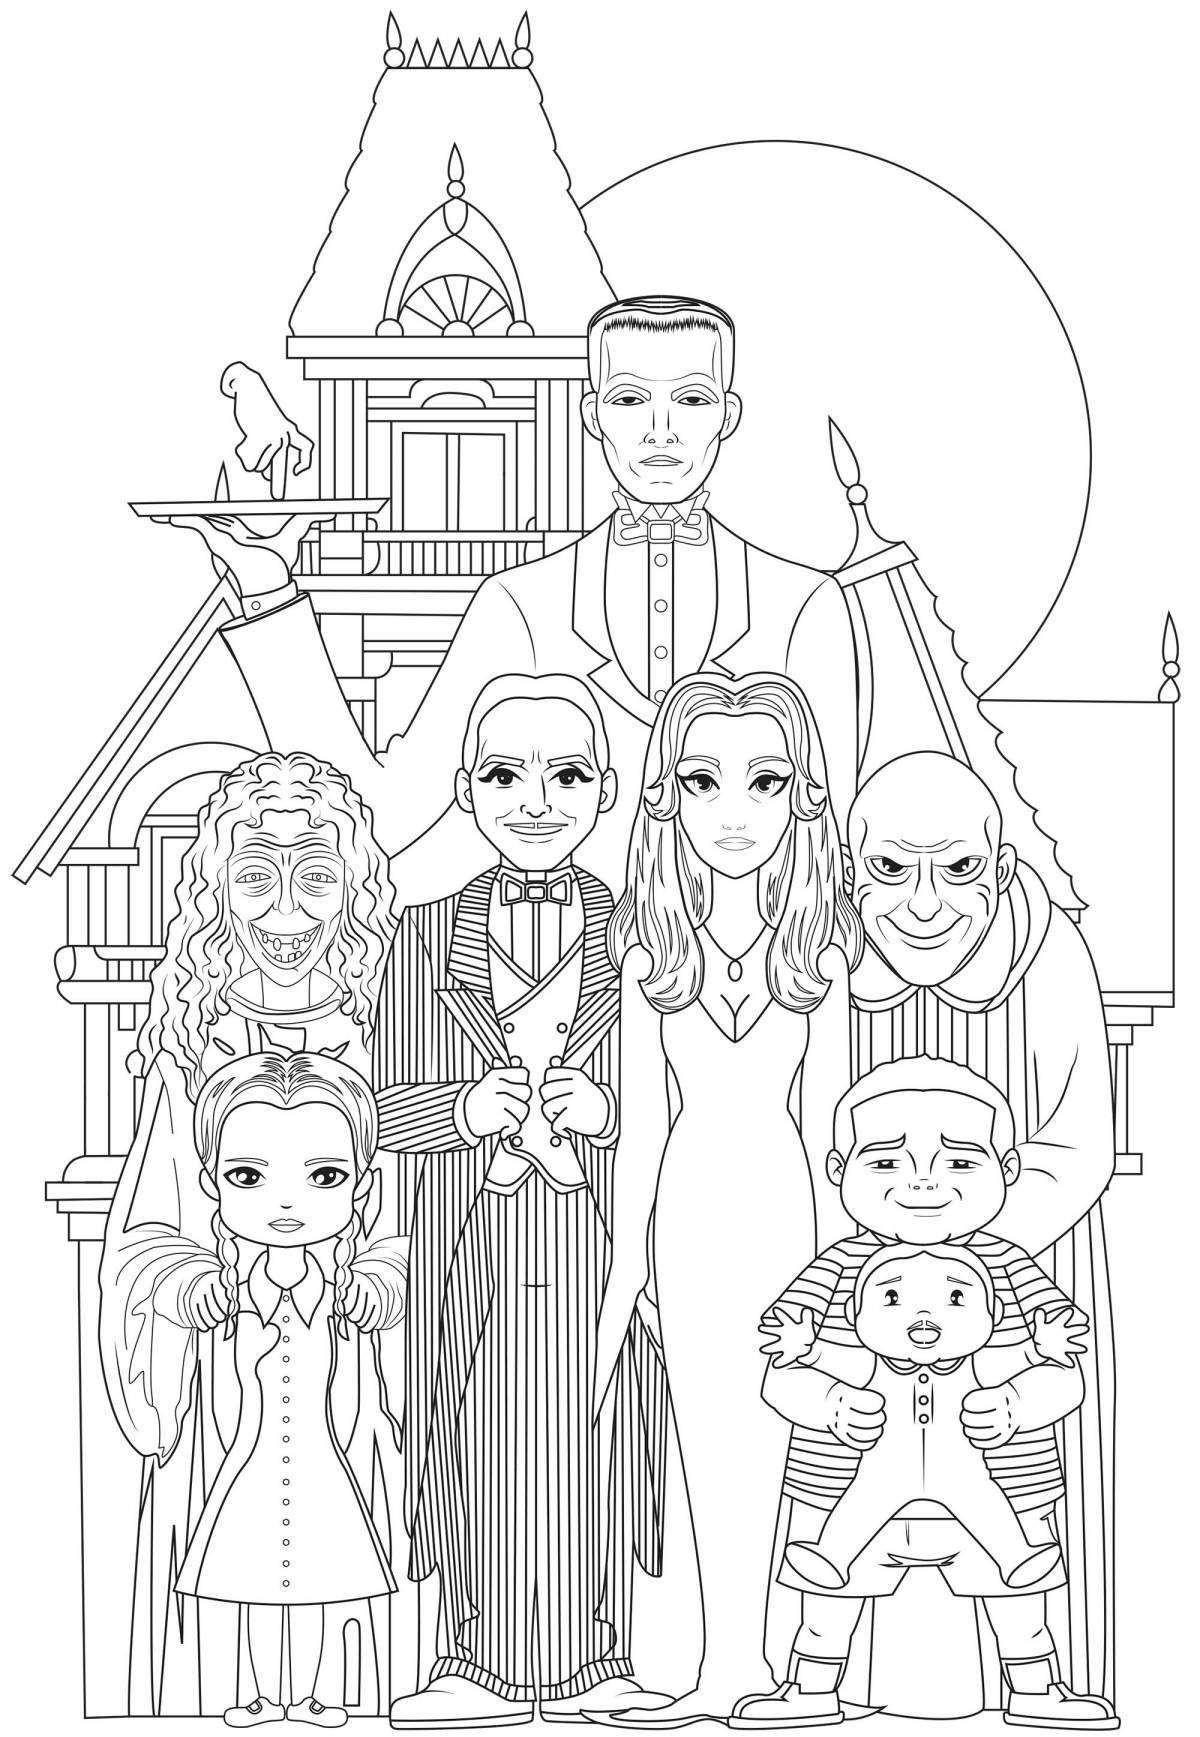 Vivacious coloring page full length Wednesday